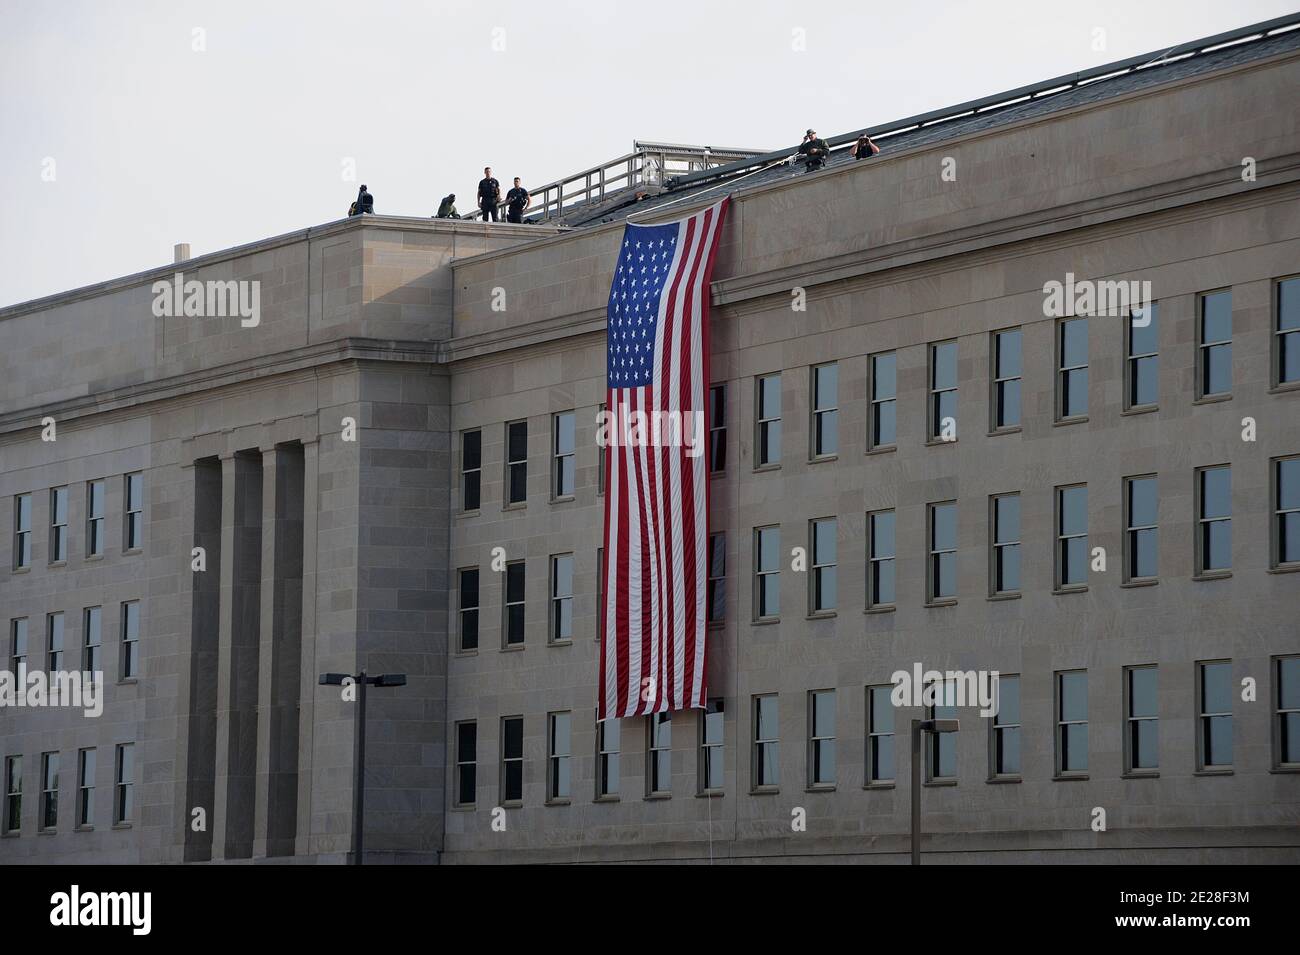 A huge American flag hangs at the point of impact at the Pentagon on the 10th anniversary of 9/11 2001 terrorist attacks on September 11, 2011 in Arlington, VA, USA,. Photo by Olivier Douliery/ABACAPRESS.COM Stock Photo